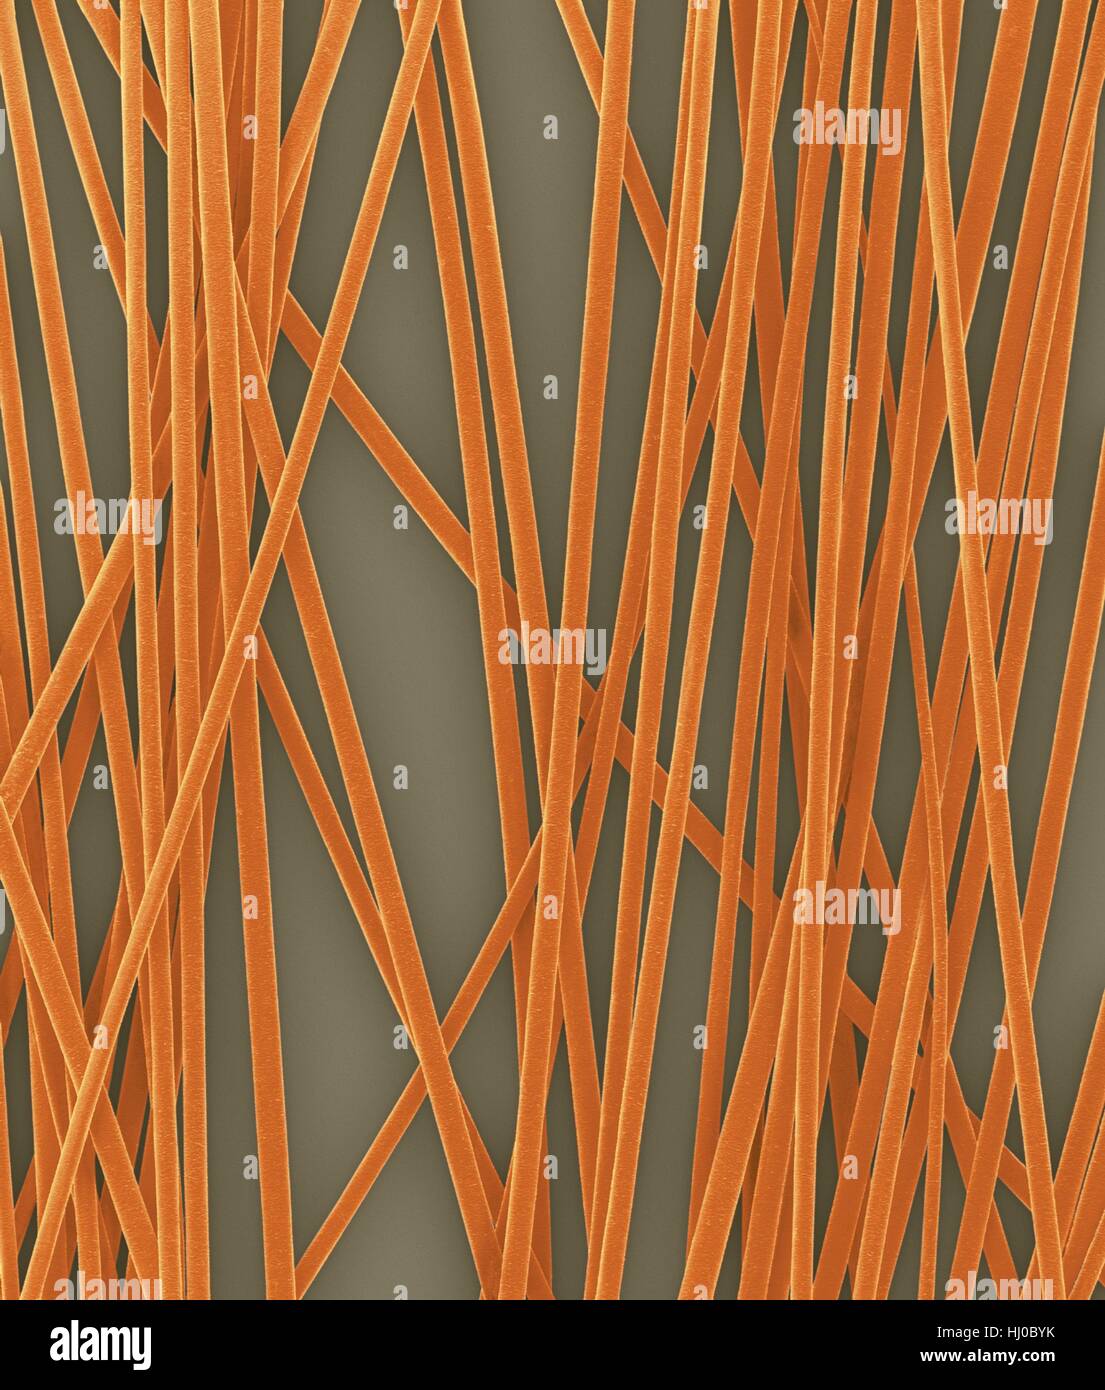 Human hair shafts from head,coloured scanning electron micrograph (SEM).The outer layer of hair (the cuticle) has overlapping scales of keratin.These scales are thought to prevent hairs from matting together.Hair is made up of fibrous protein called keratin.Internally hair shaft is divided into three concentric sheaths (layers) called medulla,cortex outer cuticle.Hair is non-living tissue.Hair grows from hair root (bulb) embedded in skin.Hair growth occurs when epidermal cells divide at base of root bulb.Hair is non-living tissue.Magnification: X6 when shortest axis printed at 25 millimetres. Stock Photo